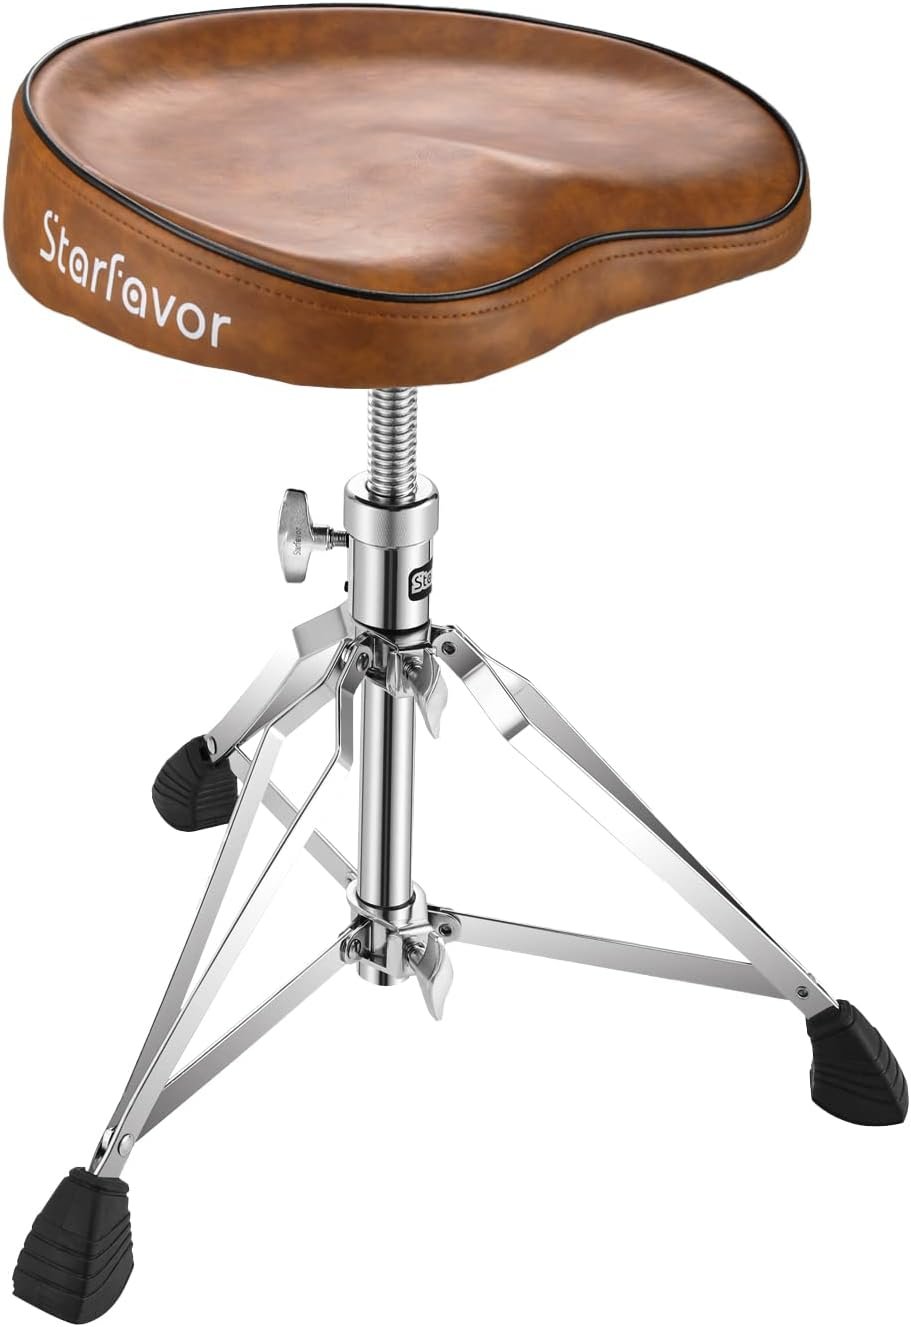 Starfavor Drum Throne Height Adjustable Padded Seat Drum Stool, with Double Braced Anti-Slip Feet Swivel Drum Chair, Butt Shape, Brown, ST-550BR